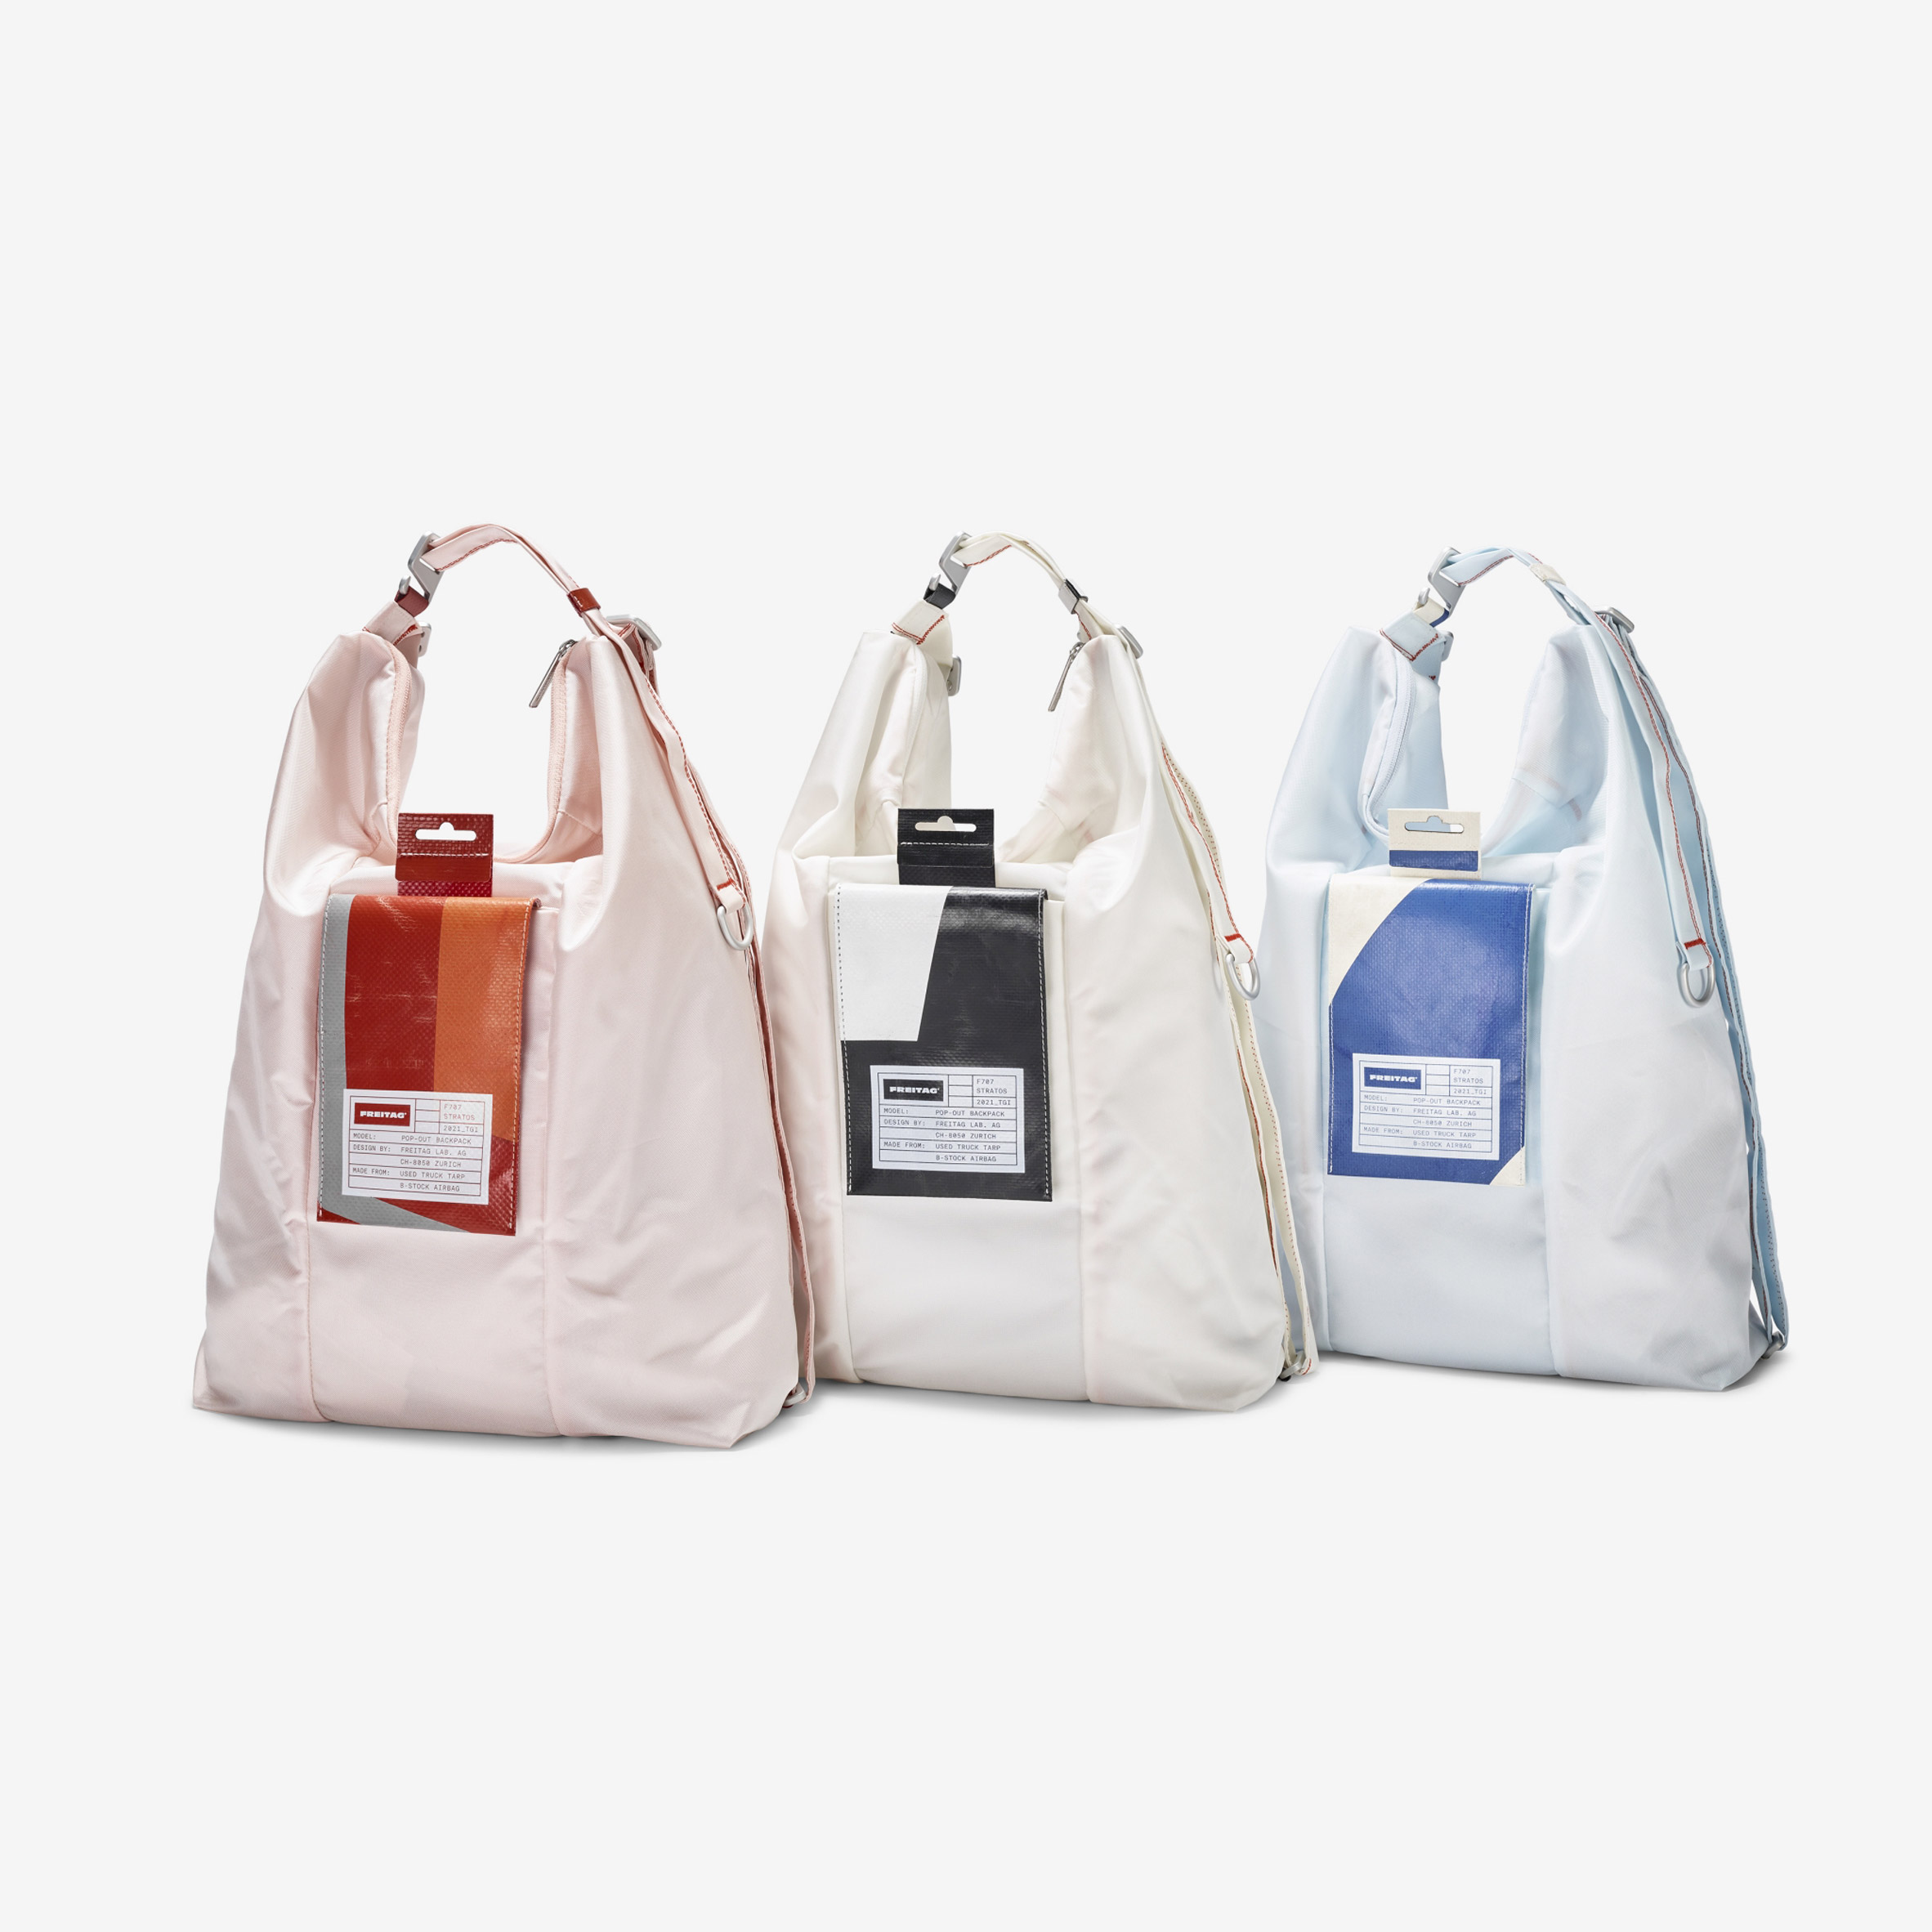 Freitag produces multipurpose bag using fabric discarded airbags